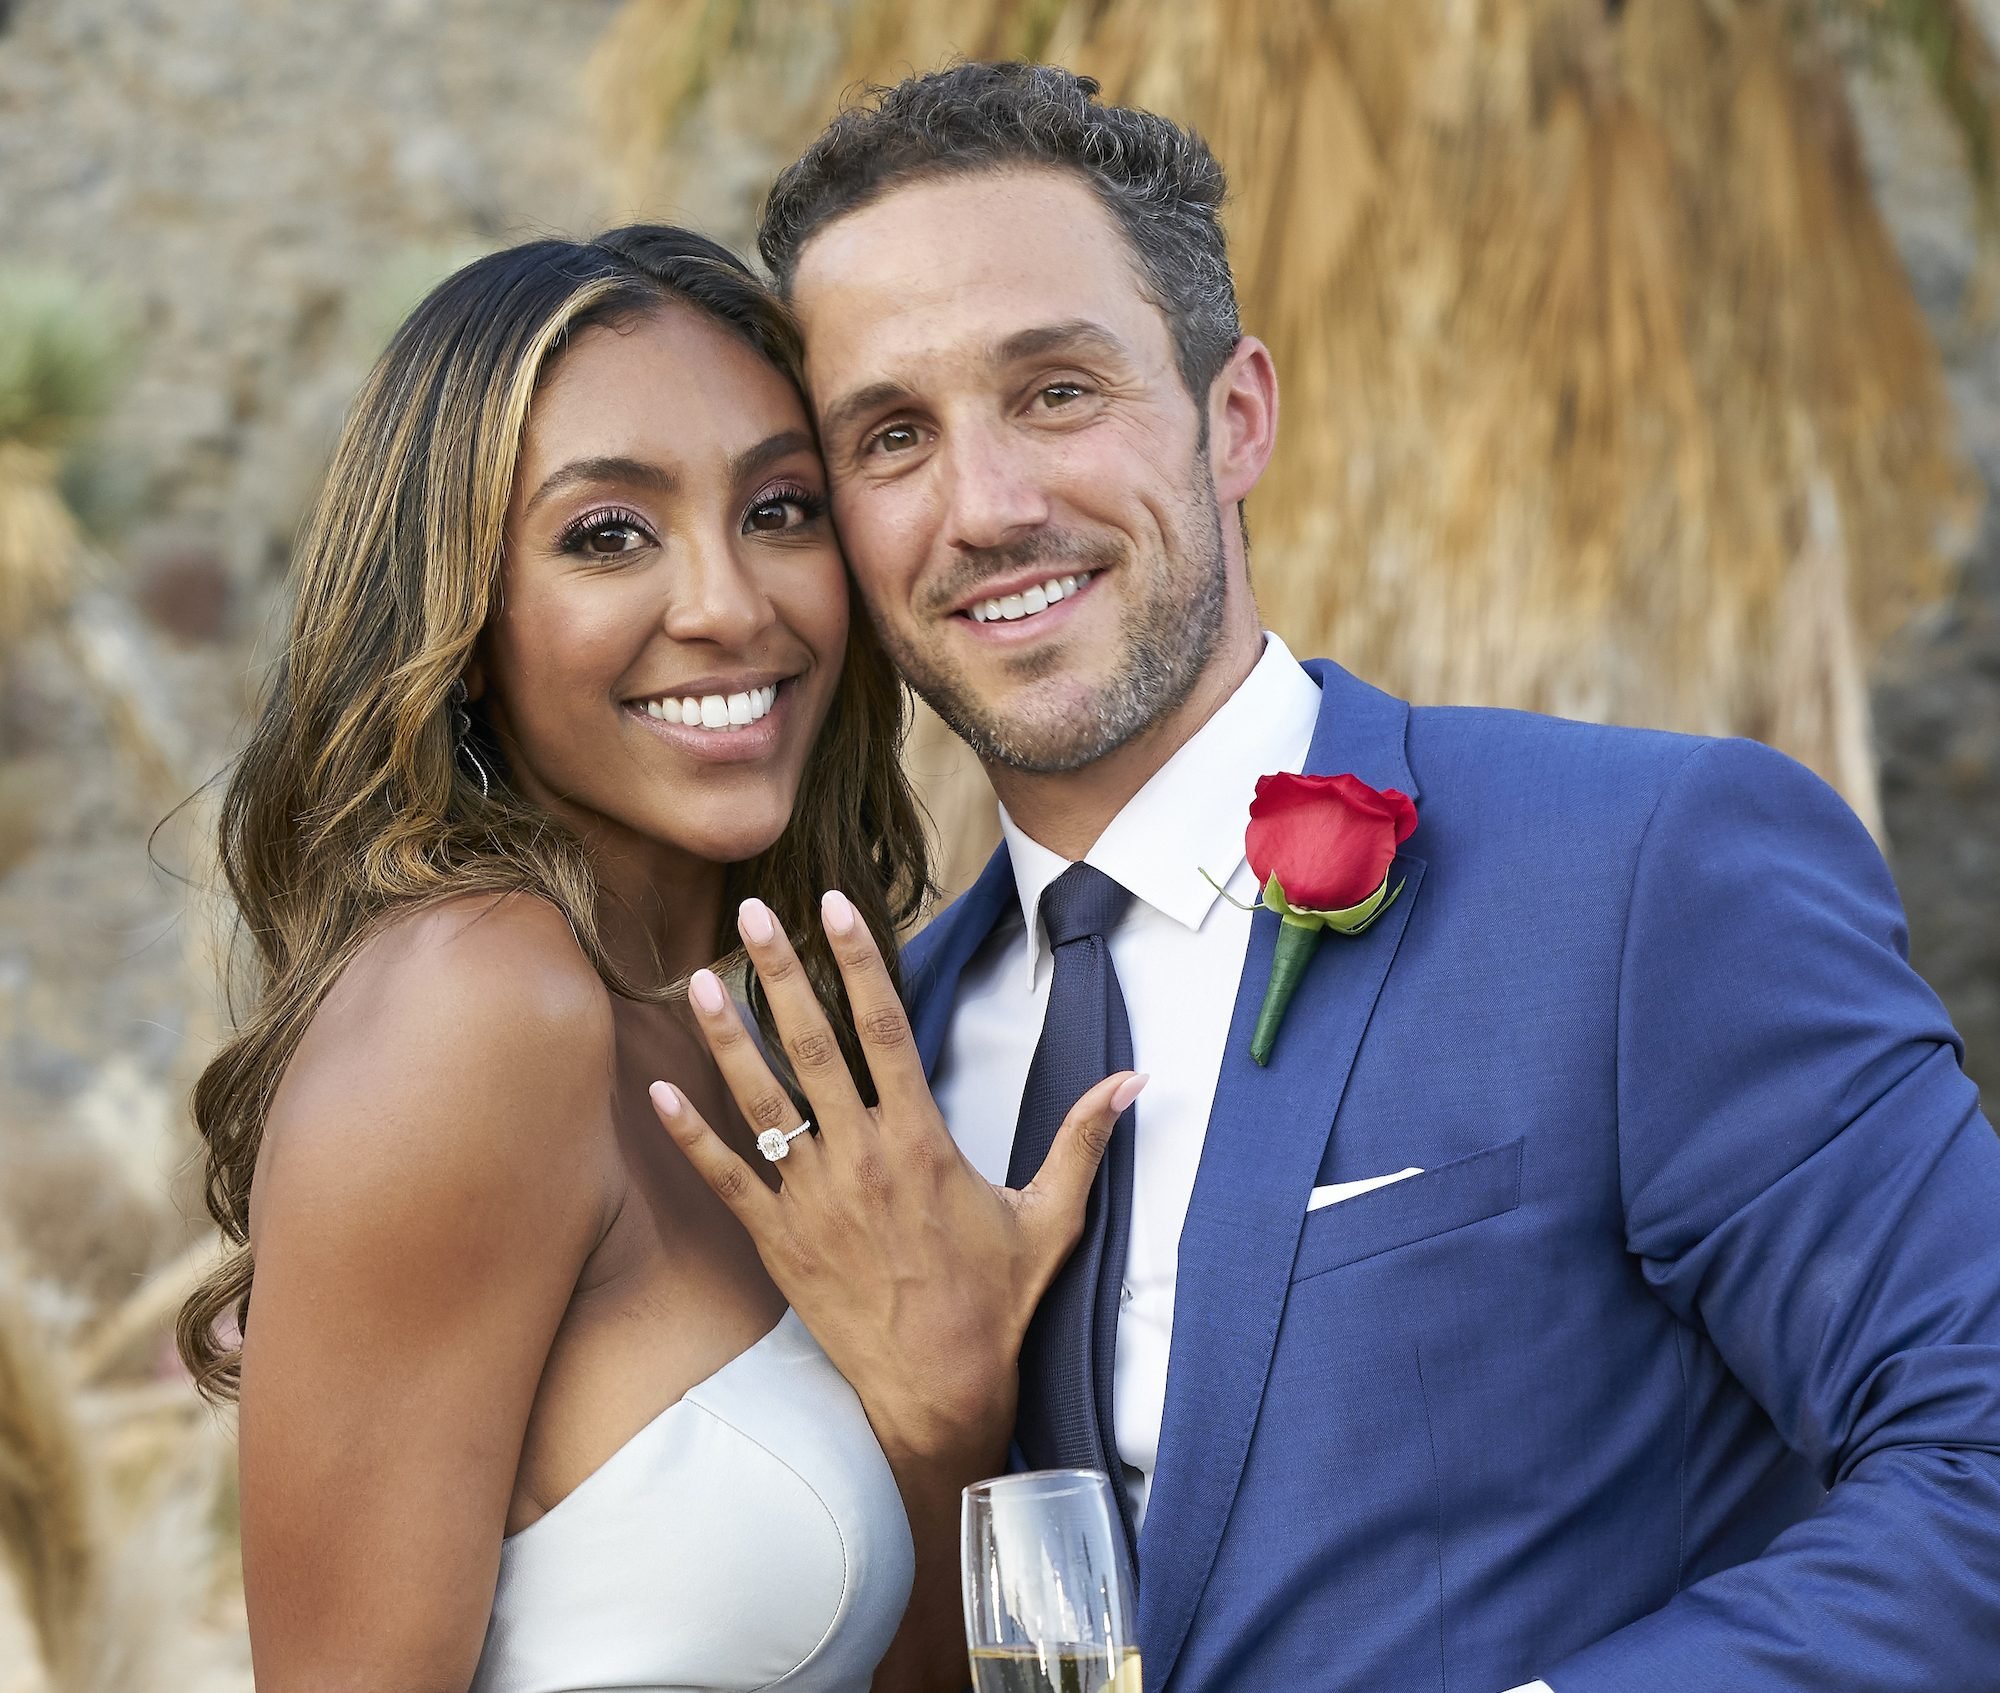 Tayshia Adams showing her engagement ring from Zac Clark in 'The Bachelorette' Season 16